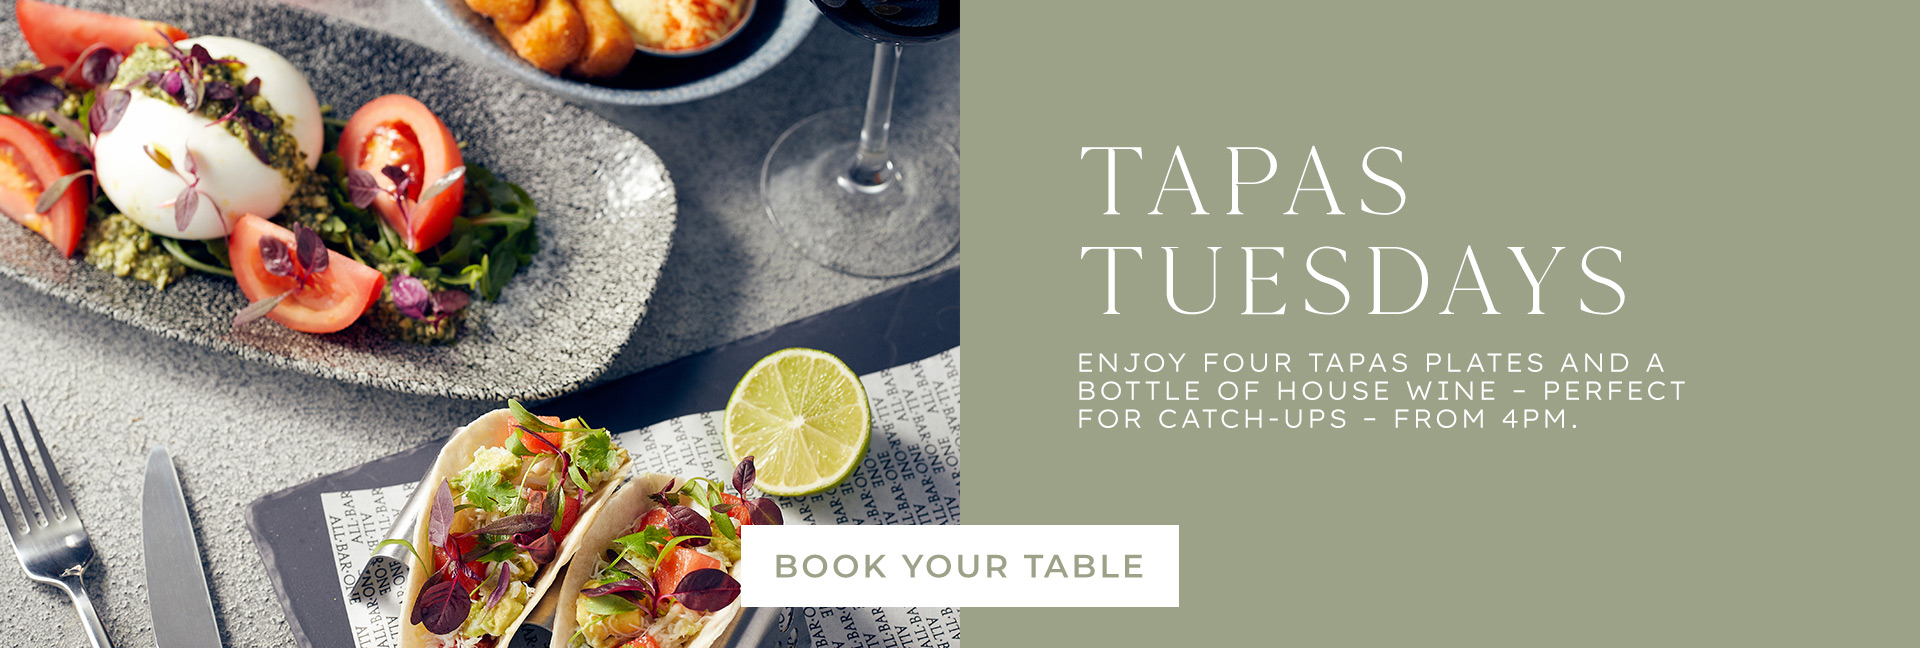 Tapas Tuesday at All Bar One Cannon Street - Book now